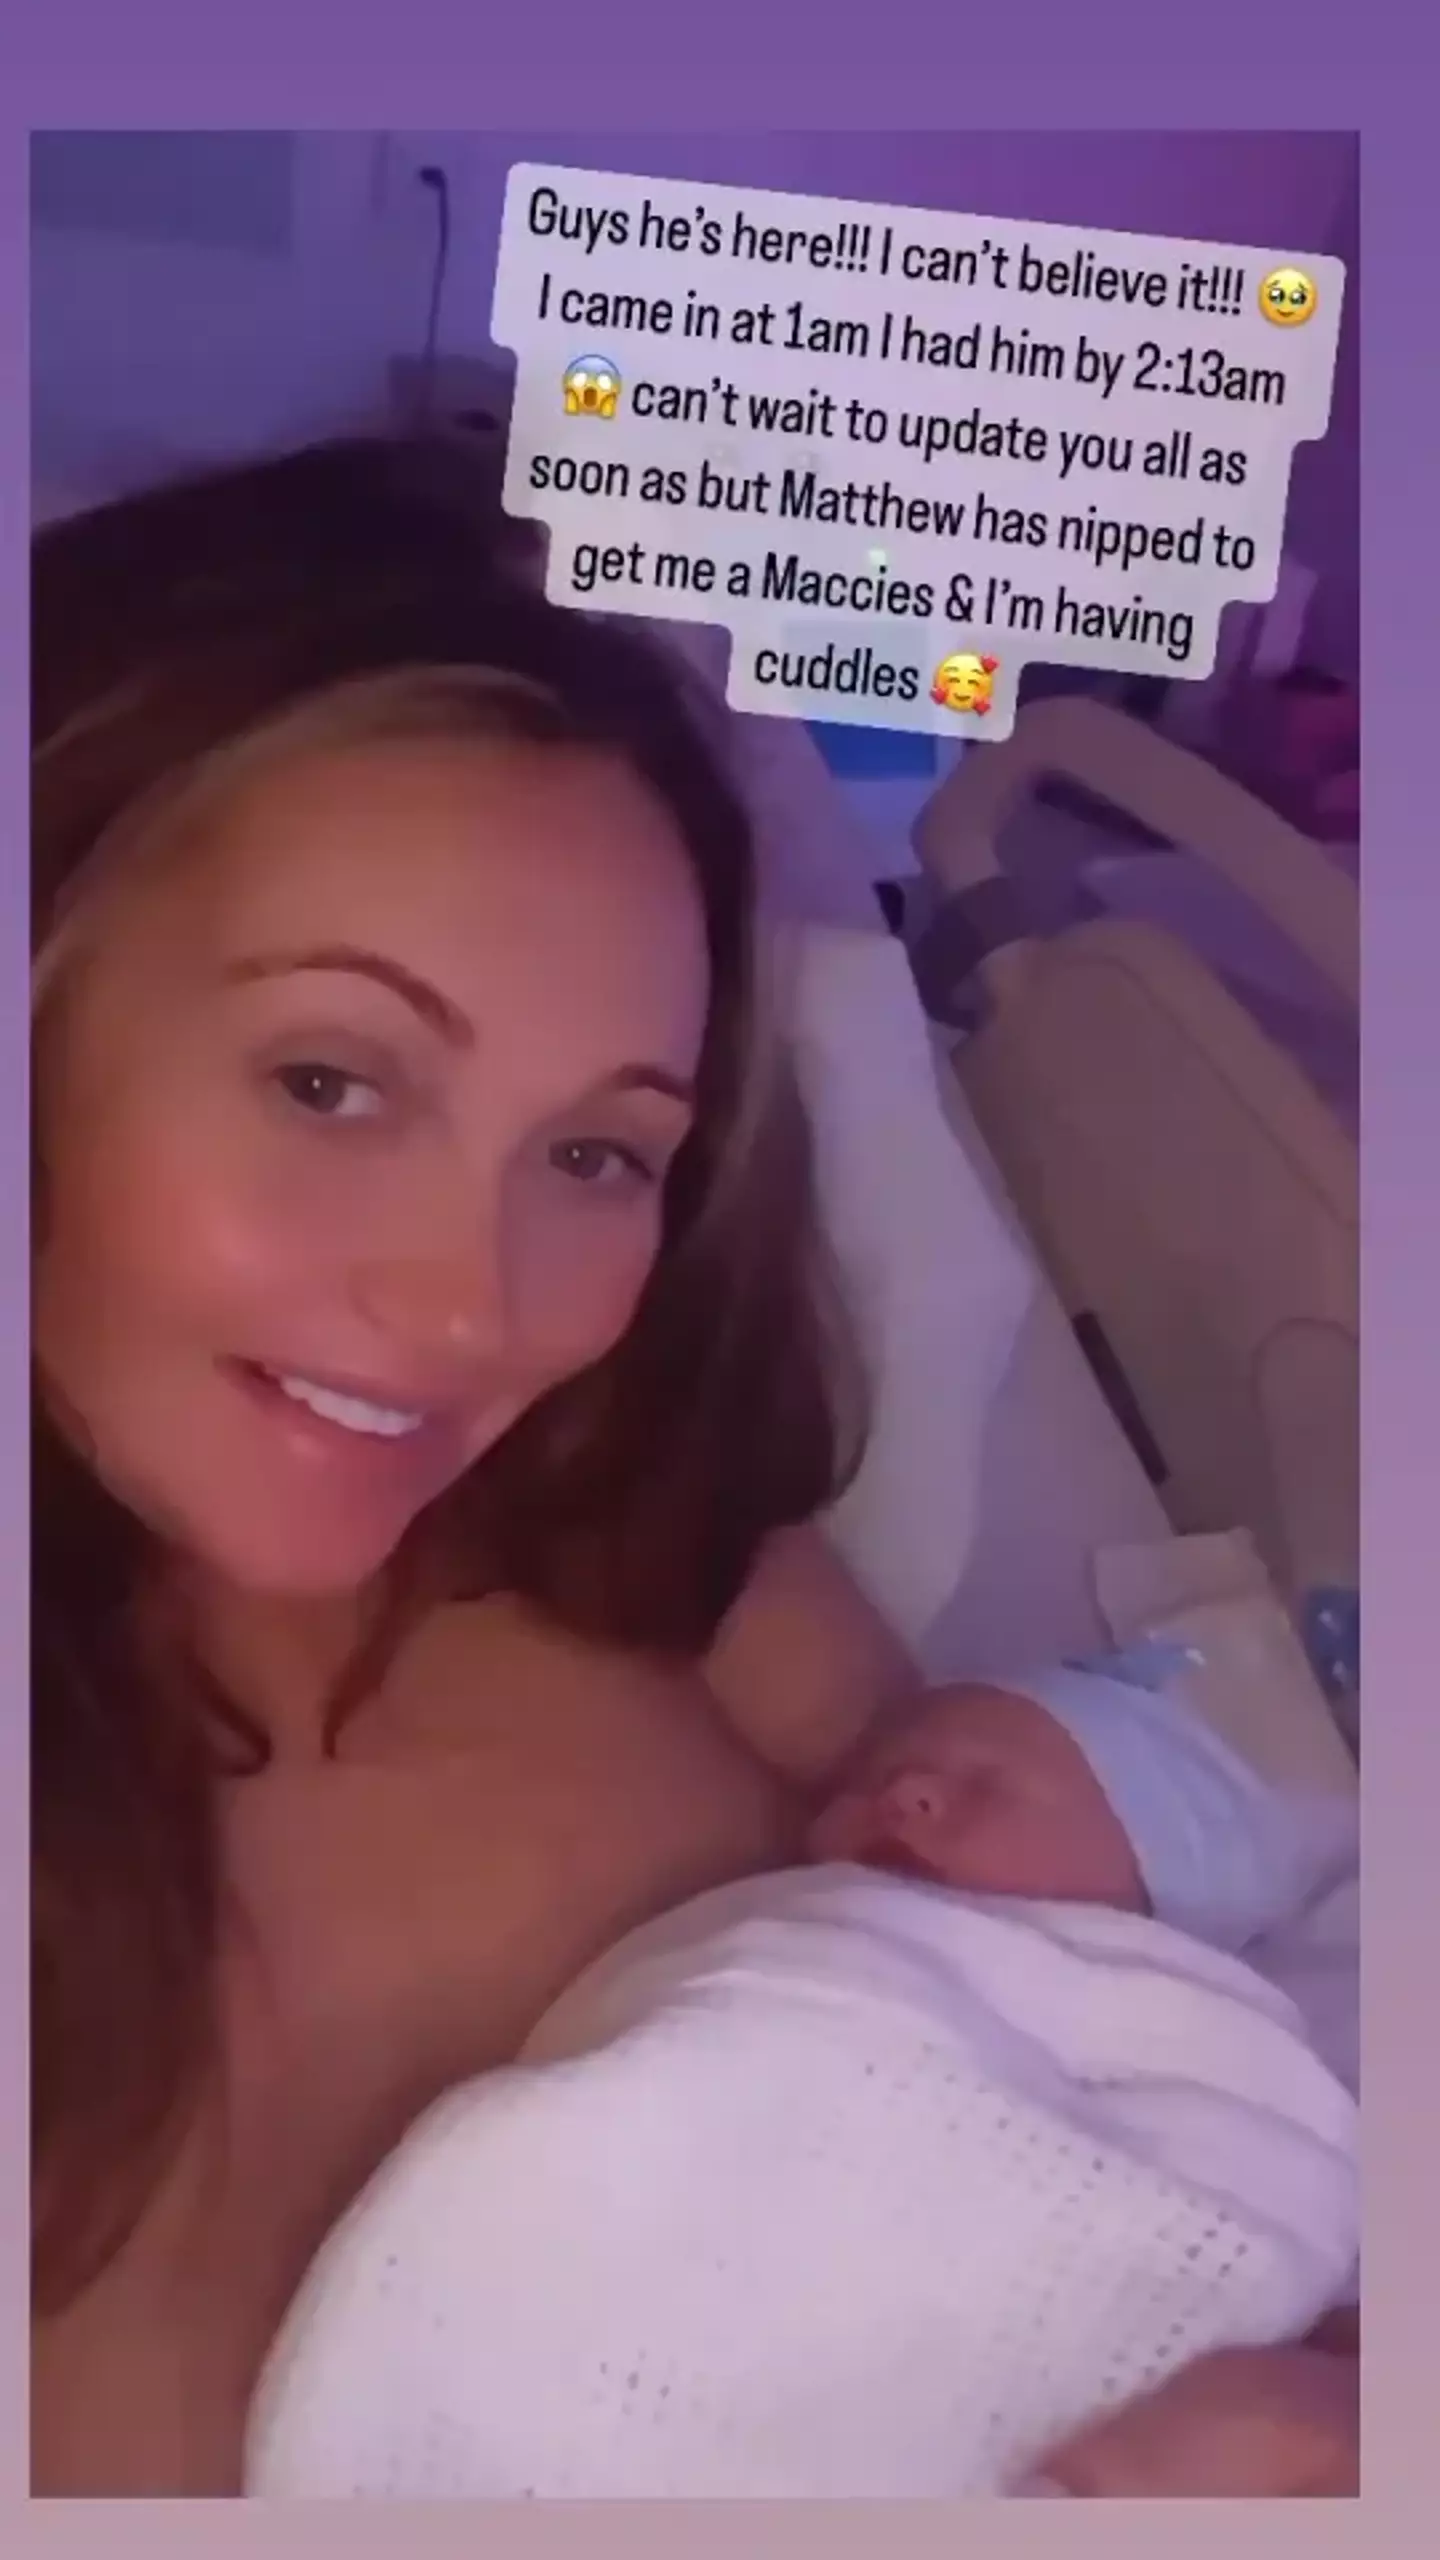 Charlotte Dawson welcomed the newest addition to her family early this morning.